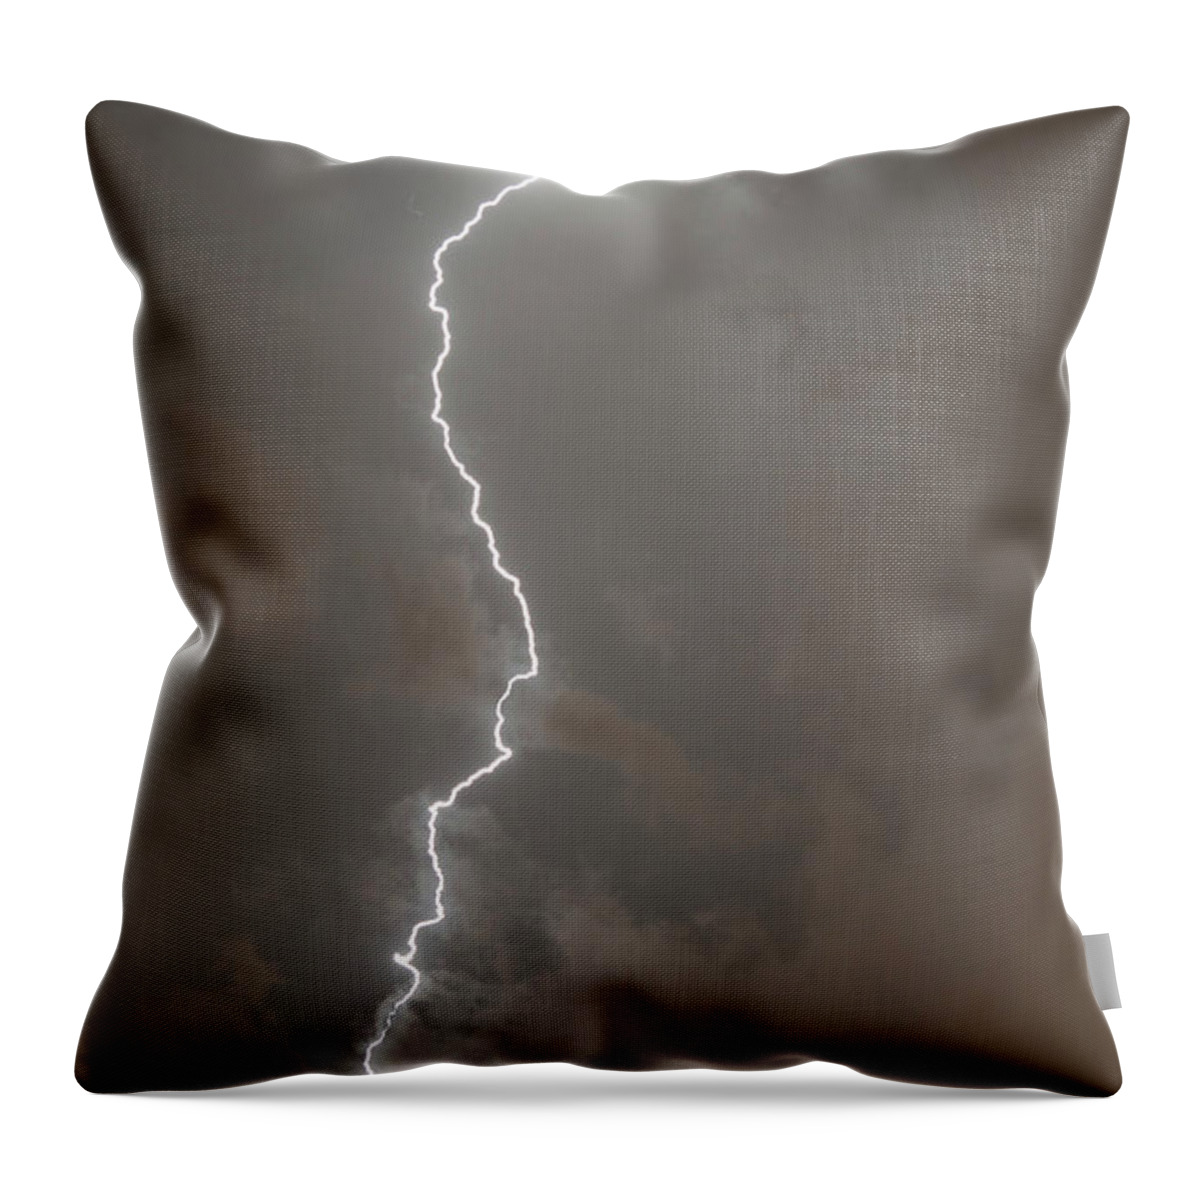 Outdoors Throw Pillow featuring the photograph Lightning By Night In A Cloudy Sky by Sami Sarkis